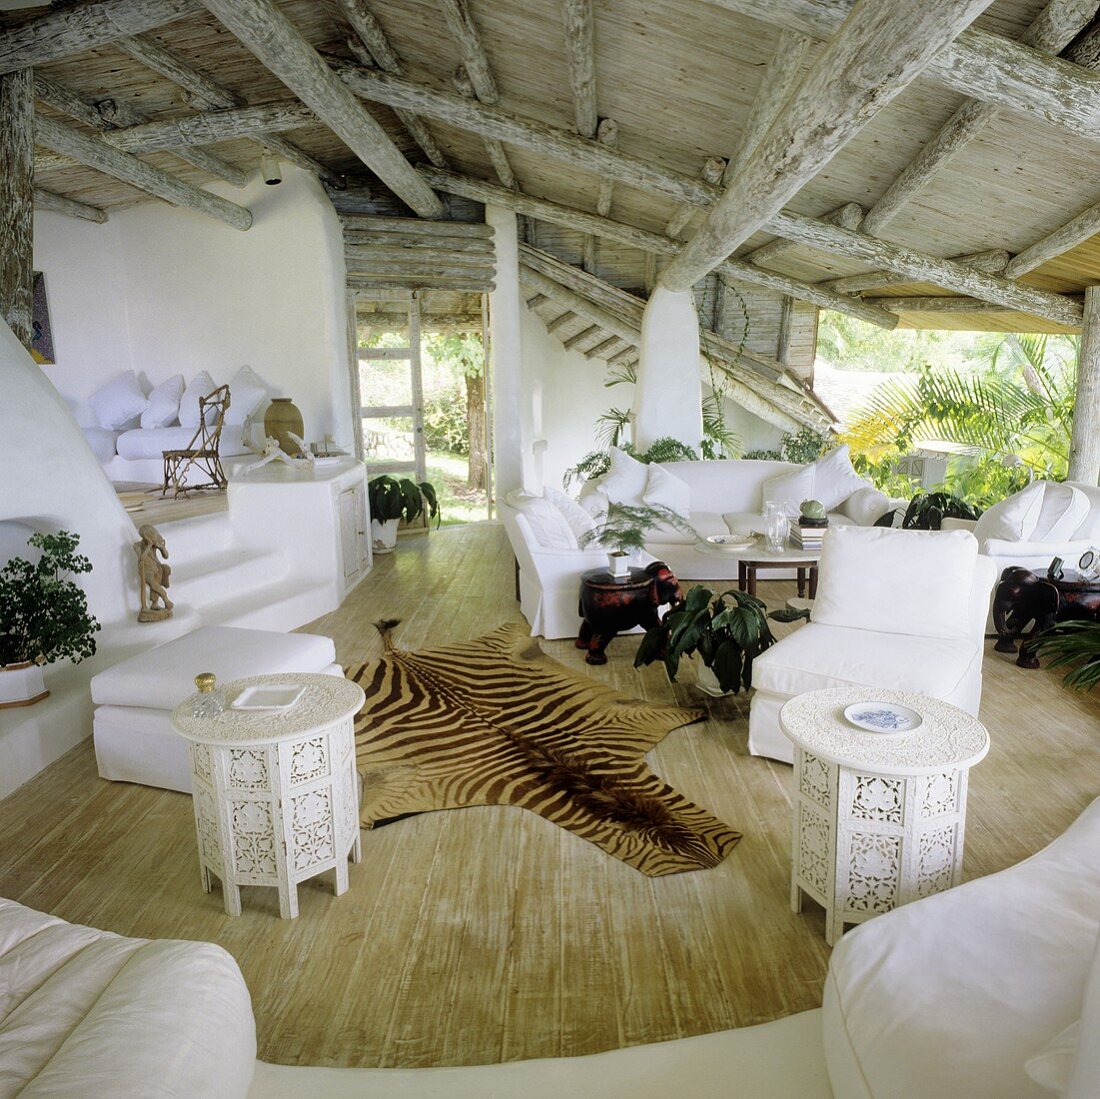 A rustic wood beam ceiling in a tropical one room house with an open view and an animal skin on the floor